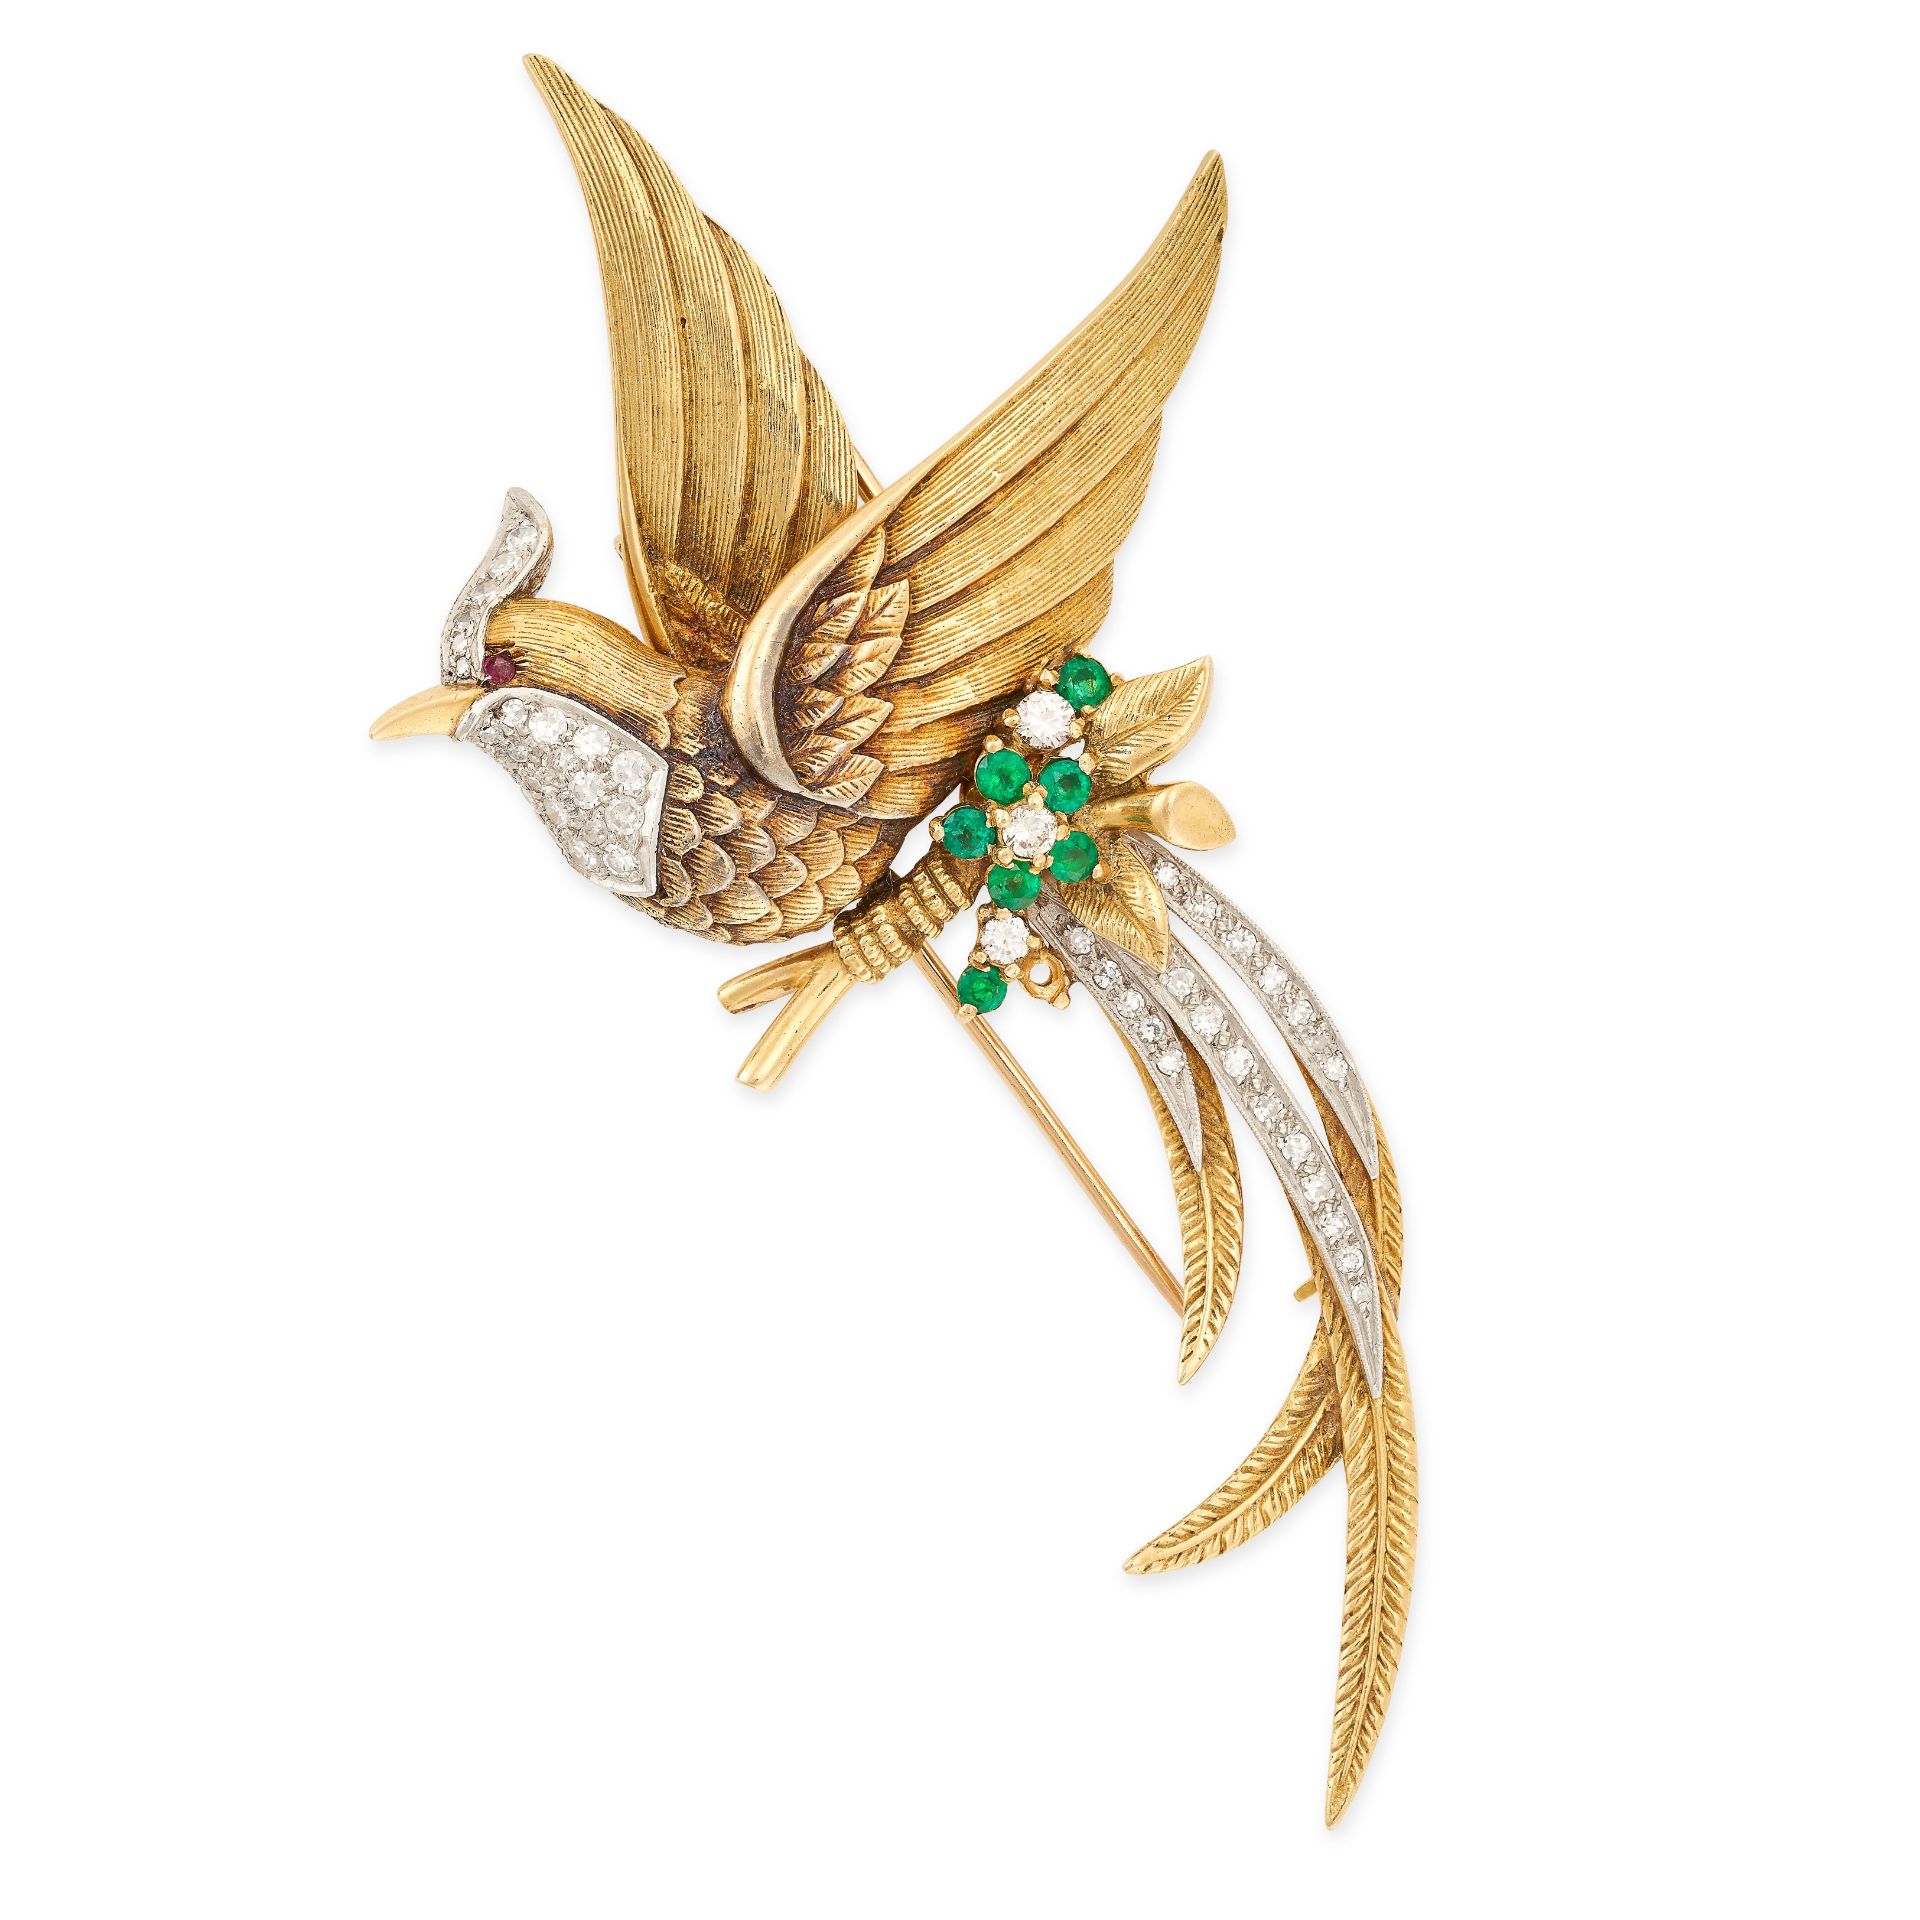 A VINTAGE DIAMOND, EMERALD AND RUBY BIRD BROOCH in 18ct yellow gold and platinum, designed as a bird